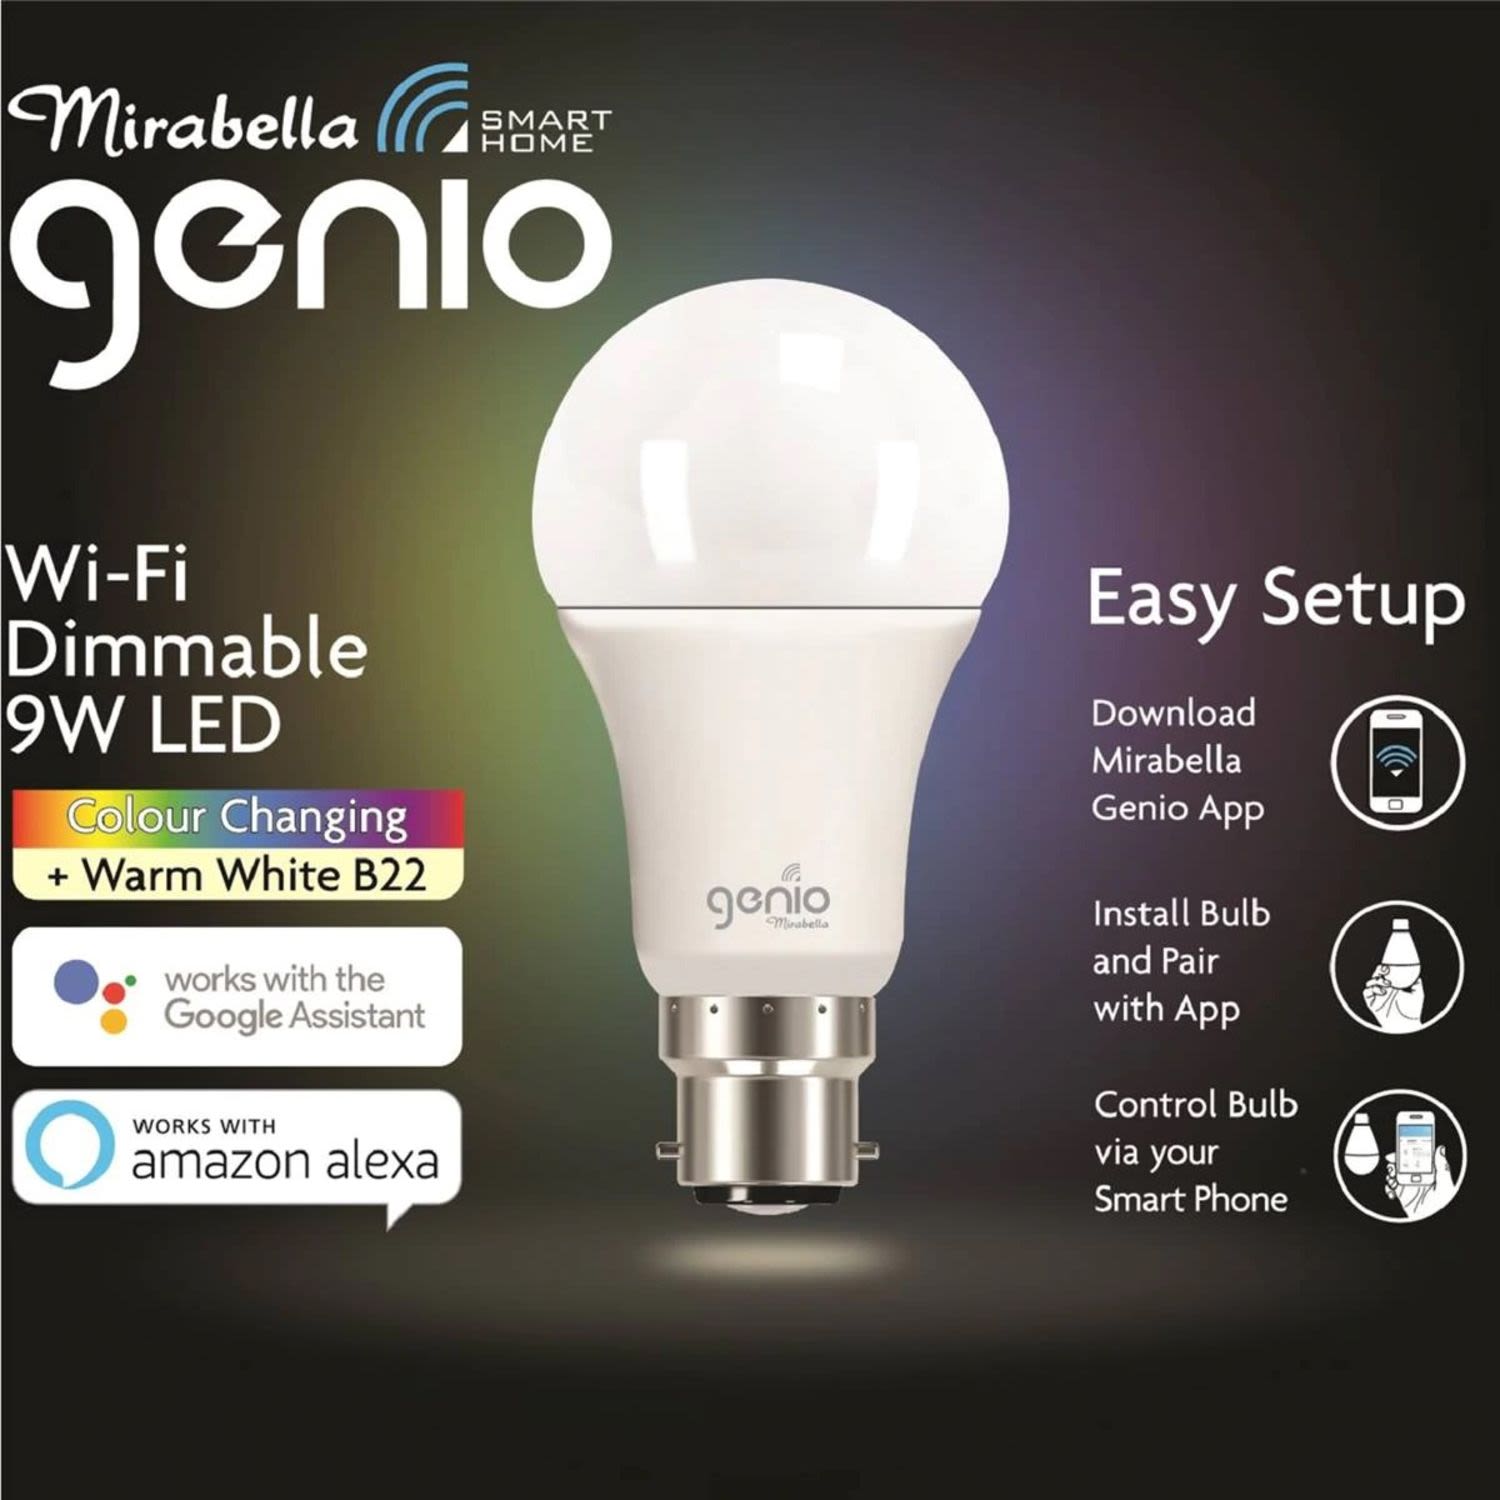 Mirabella Genio 9W Led Dimmable Bayonet Cap Colour Changing 800 Lumens, 1 Each